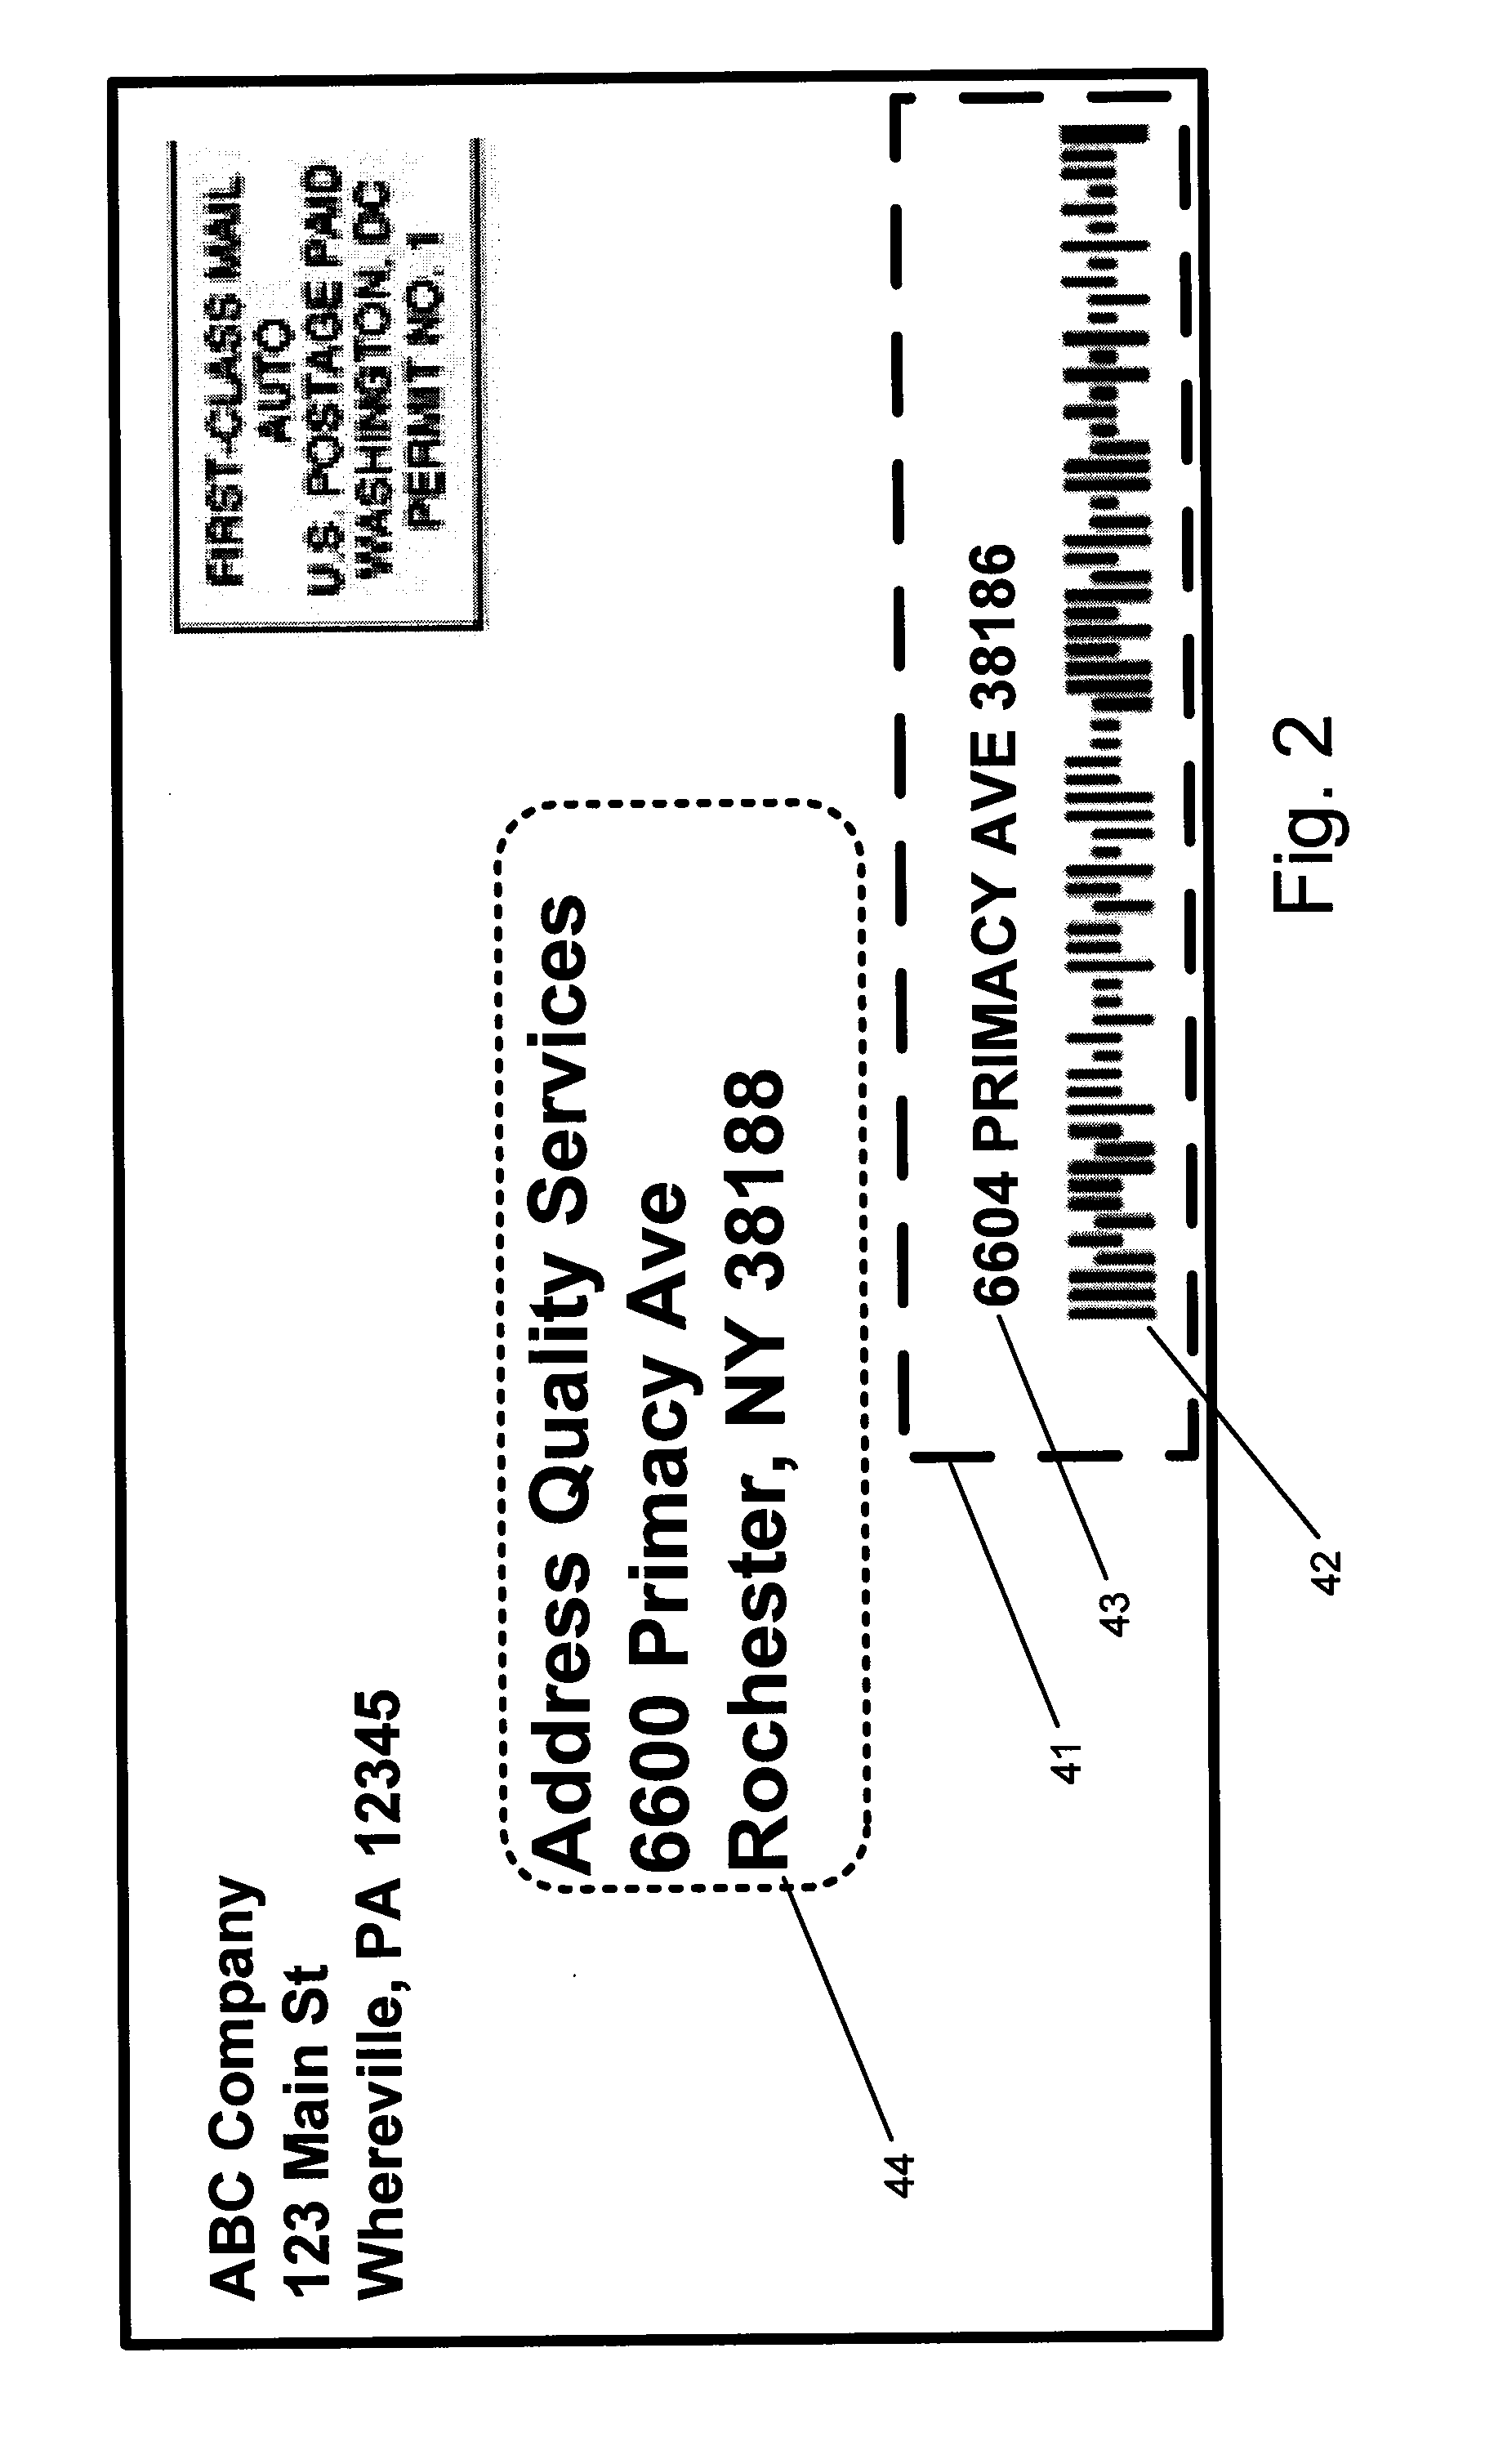 Method and system for run time directories for address services on a mail processing system